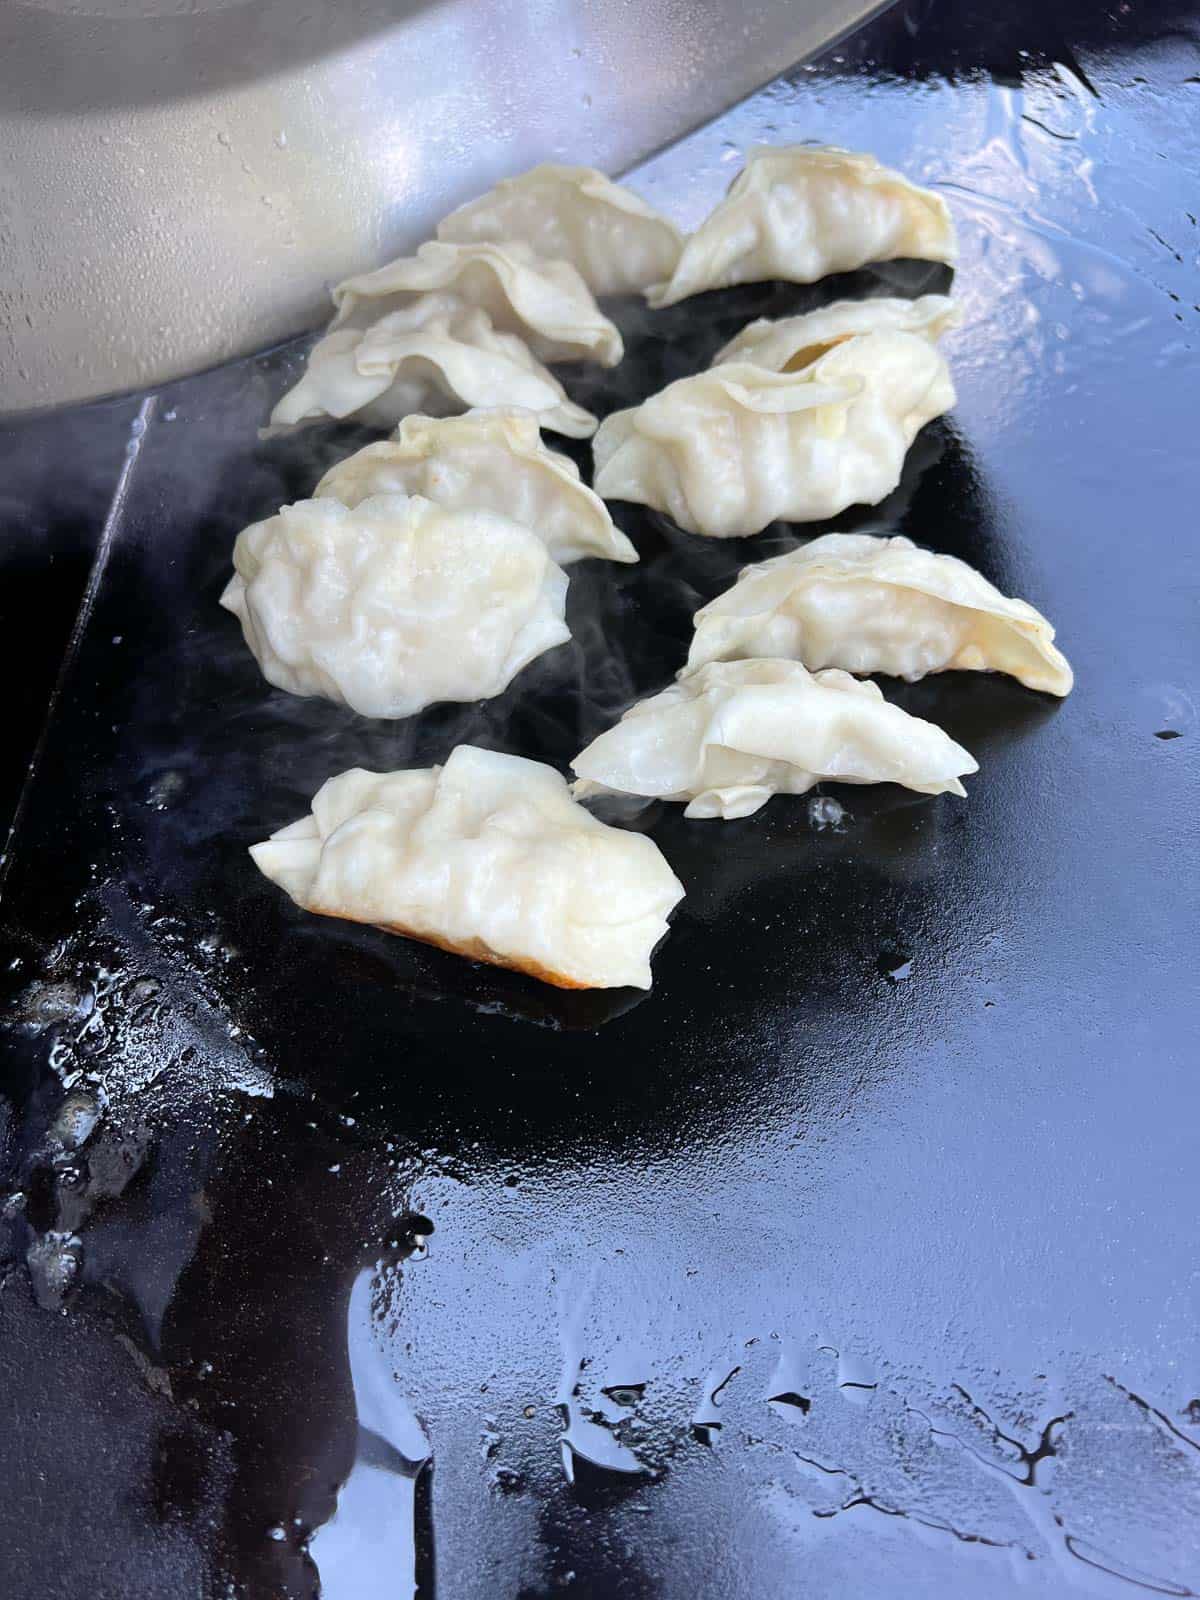 Adding water under the cooking dome to steam the potstickers.